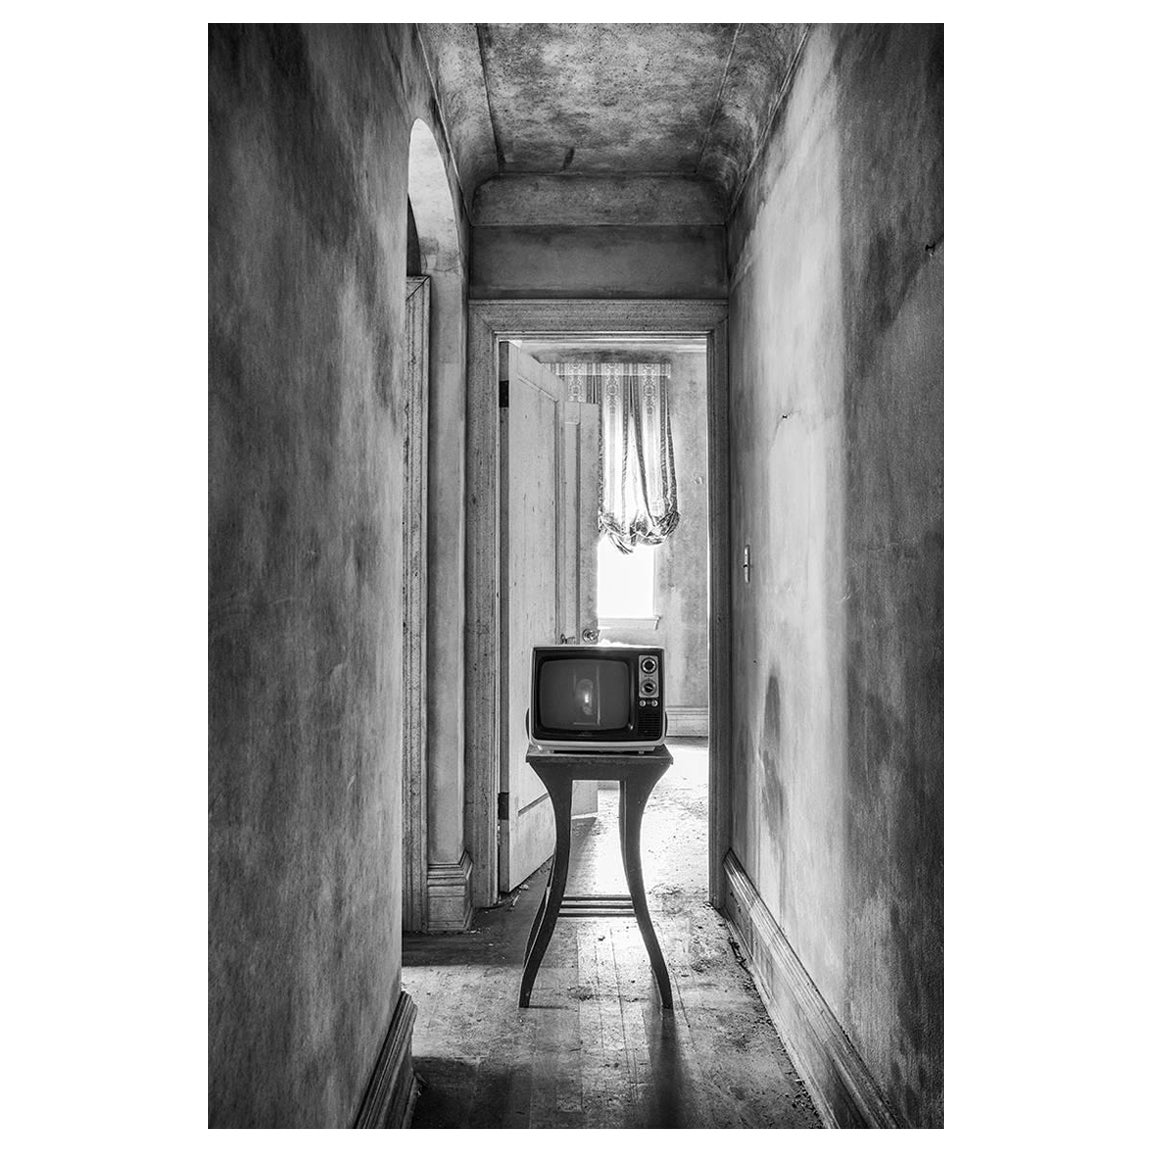 Rebecca Skinner Black and White Photograph - "Showtime", contemporary, television, abandoned, black and white, photograph